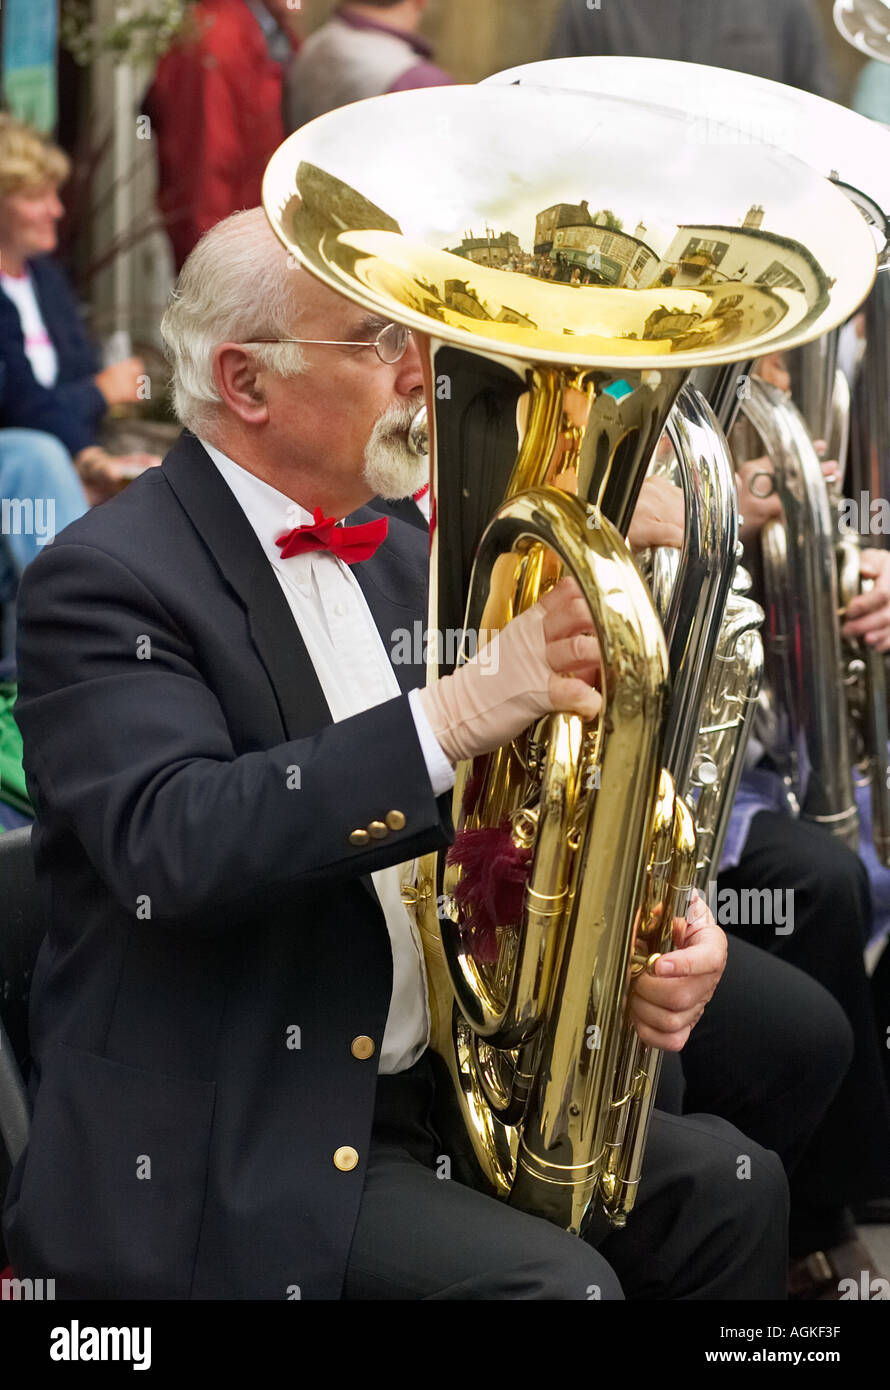 Tuba player from the Otley Brass Band playing at the Otley Folk Festival, Yorkshire, England, UK Stock Photo